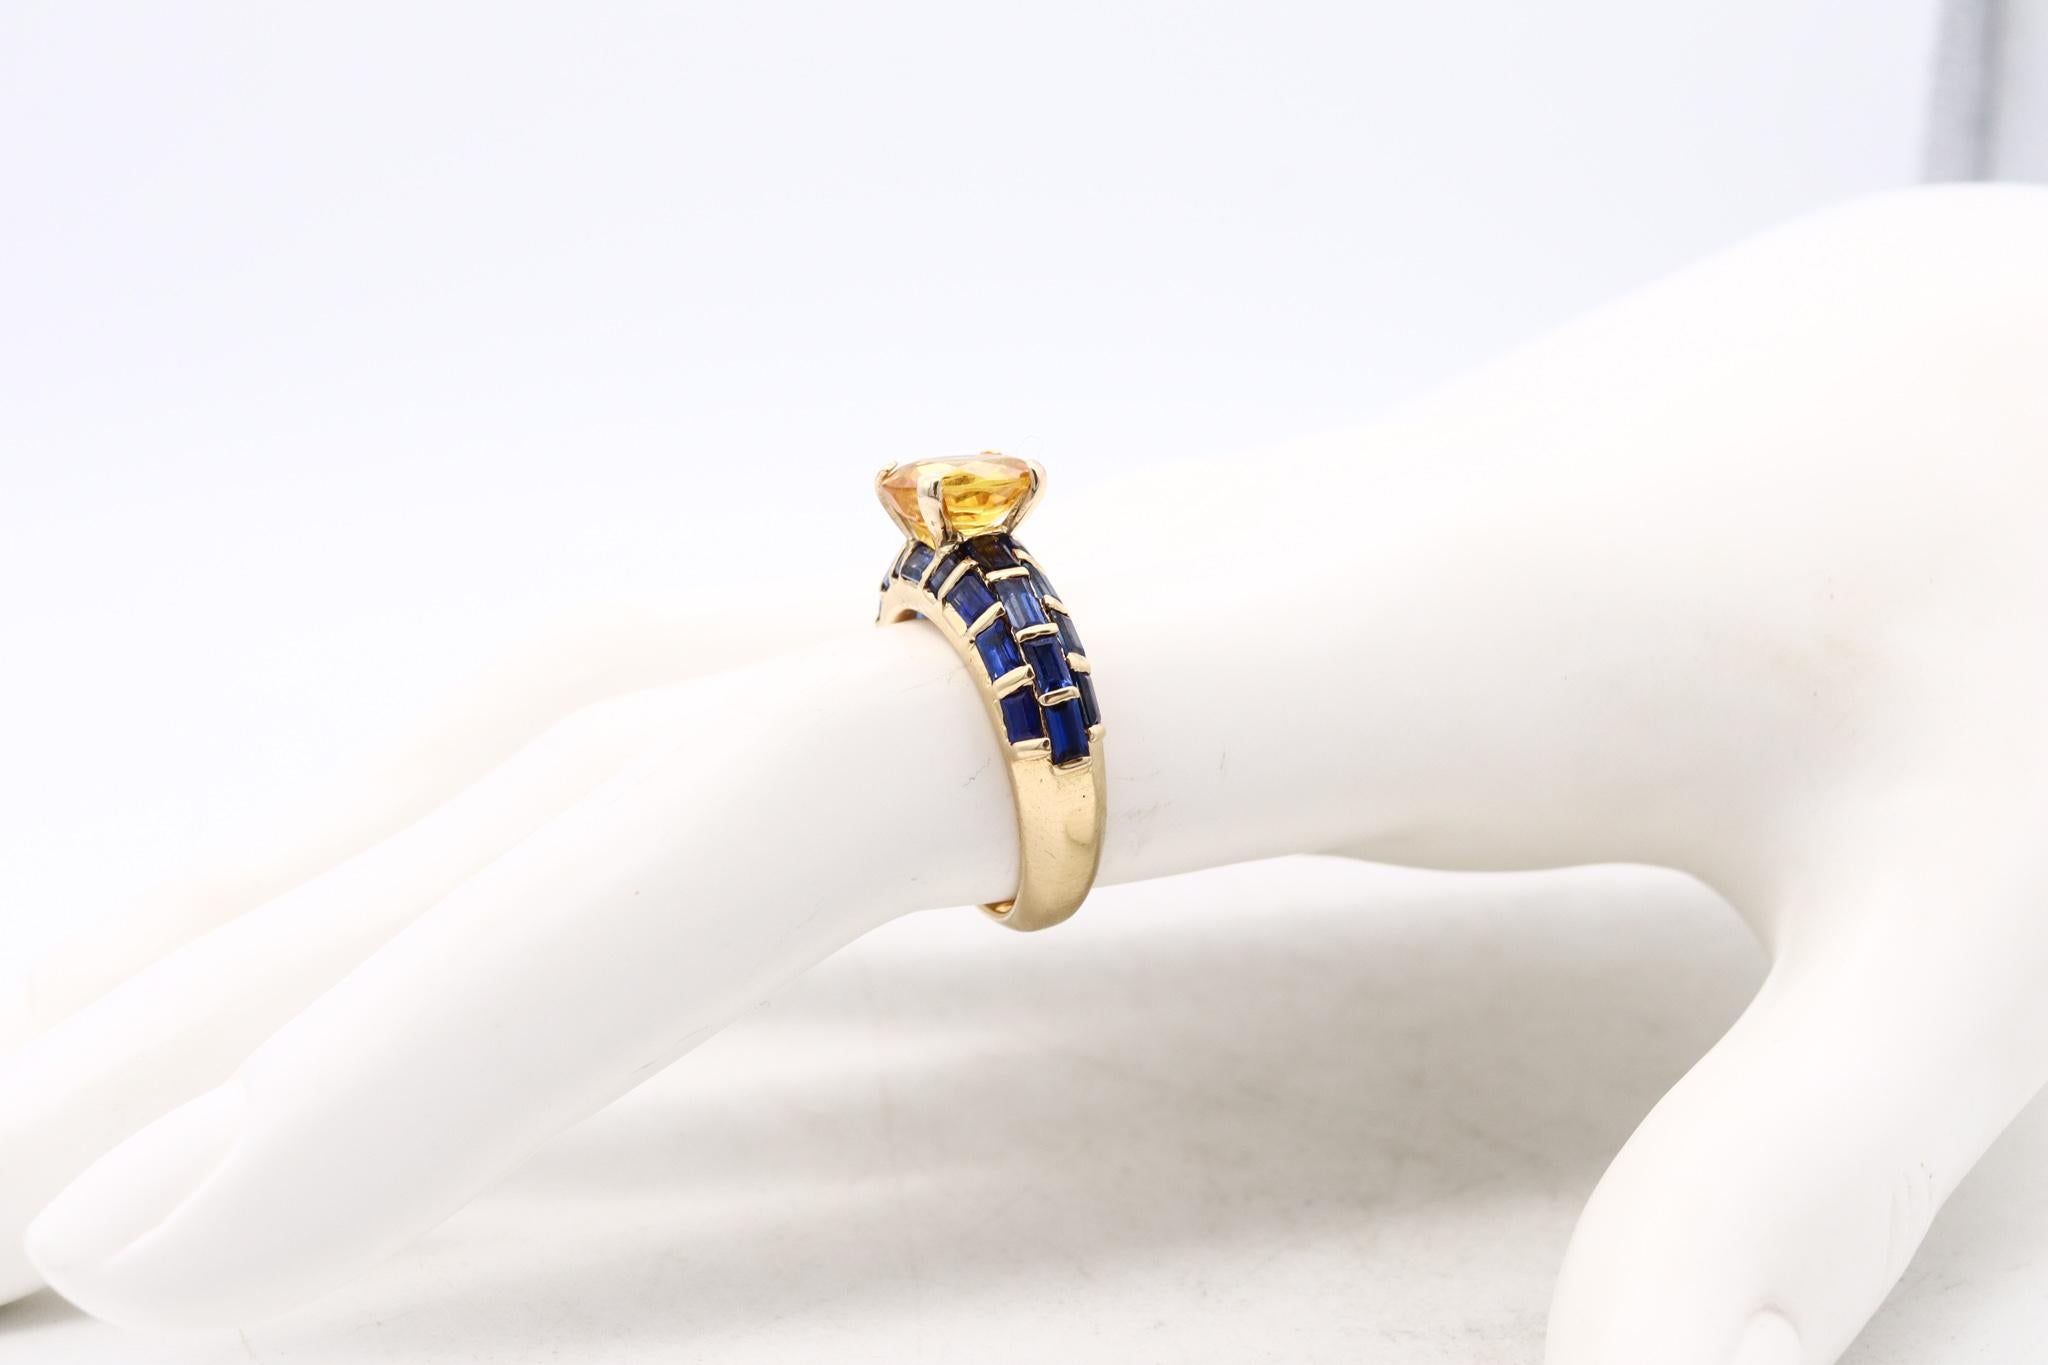 Modern ring designed by Sabbadini.

Colorful classic ring created in Milano, Italy by the exclusive house of Sabbadini. This one-of-a-kind jeweled ring has been crafted in solid yellow gold of 18 karats, with high polished surfaces.

Mounted in the